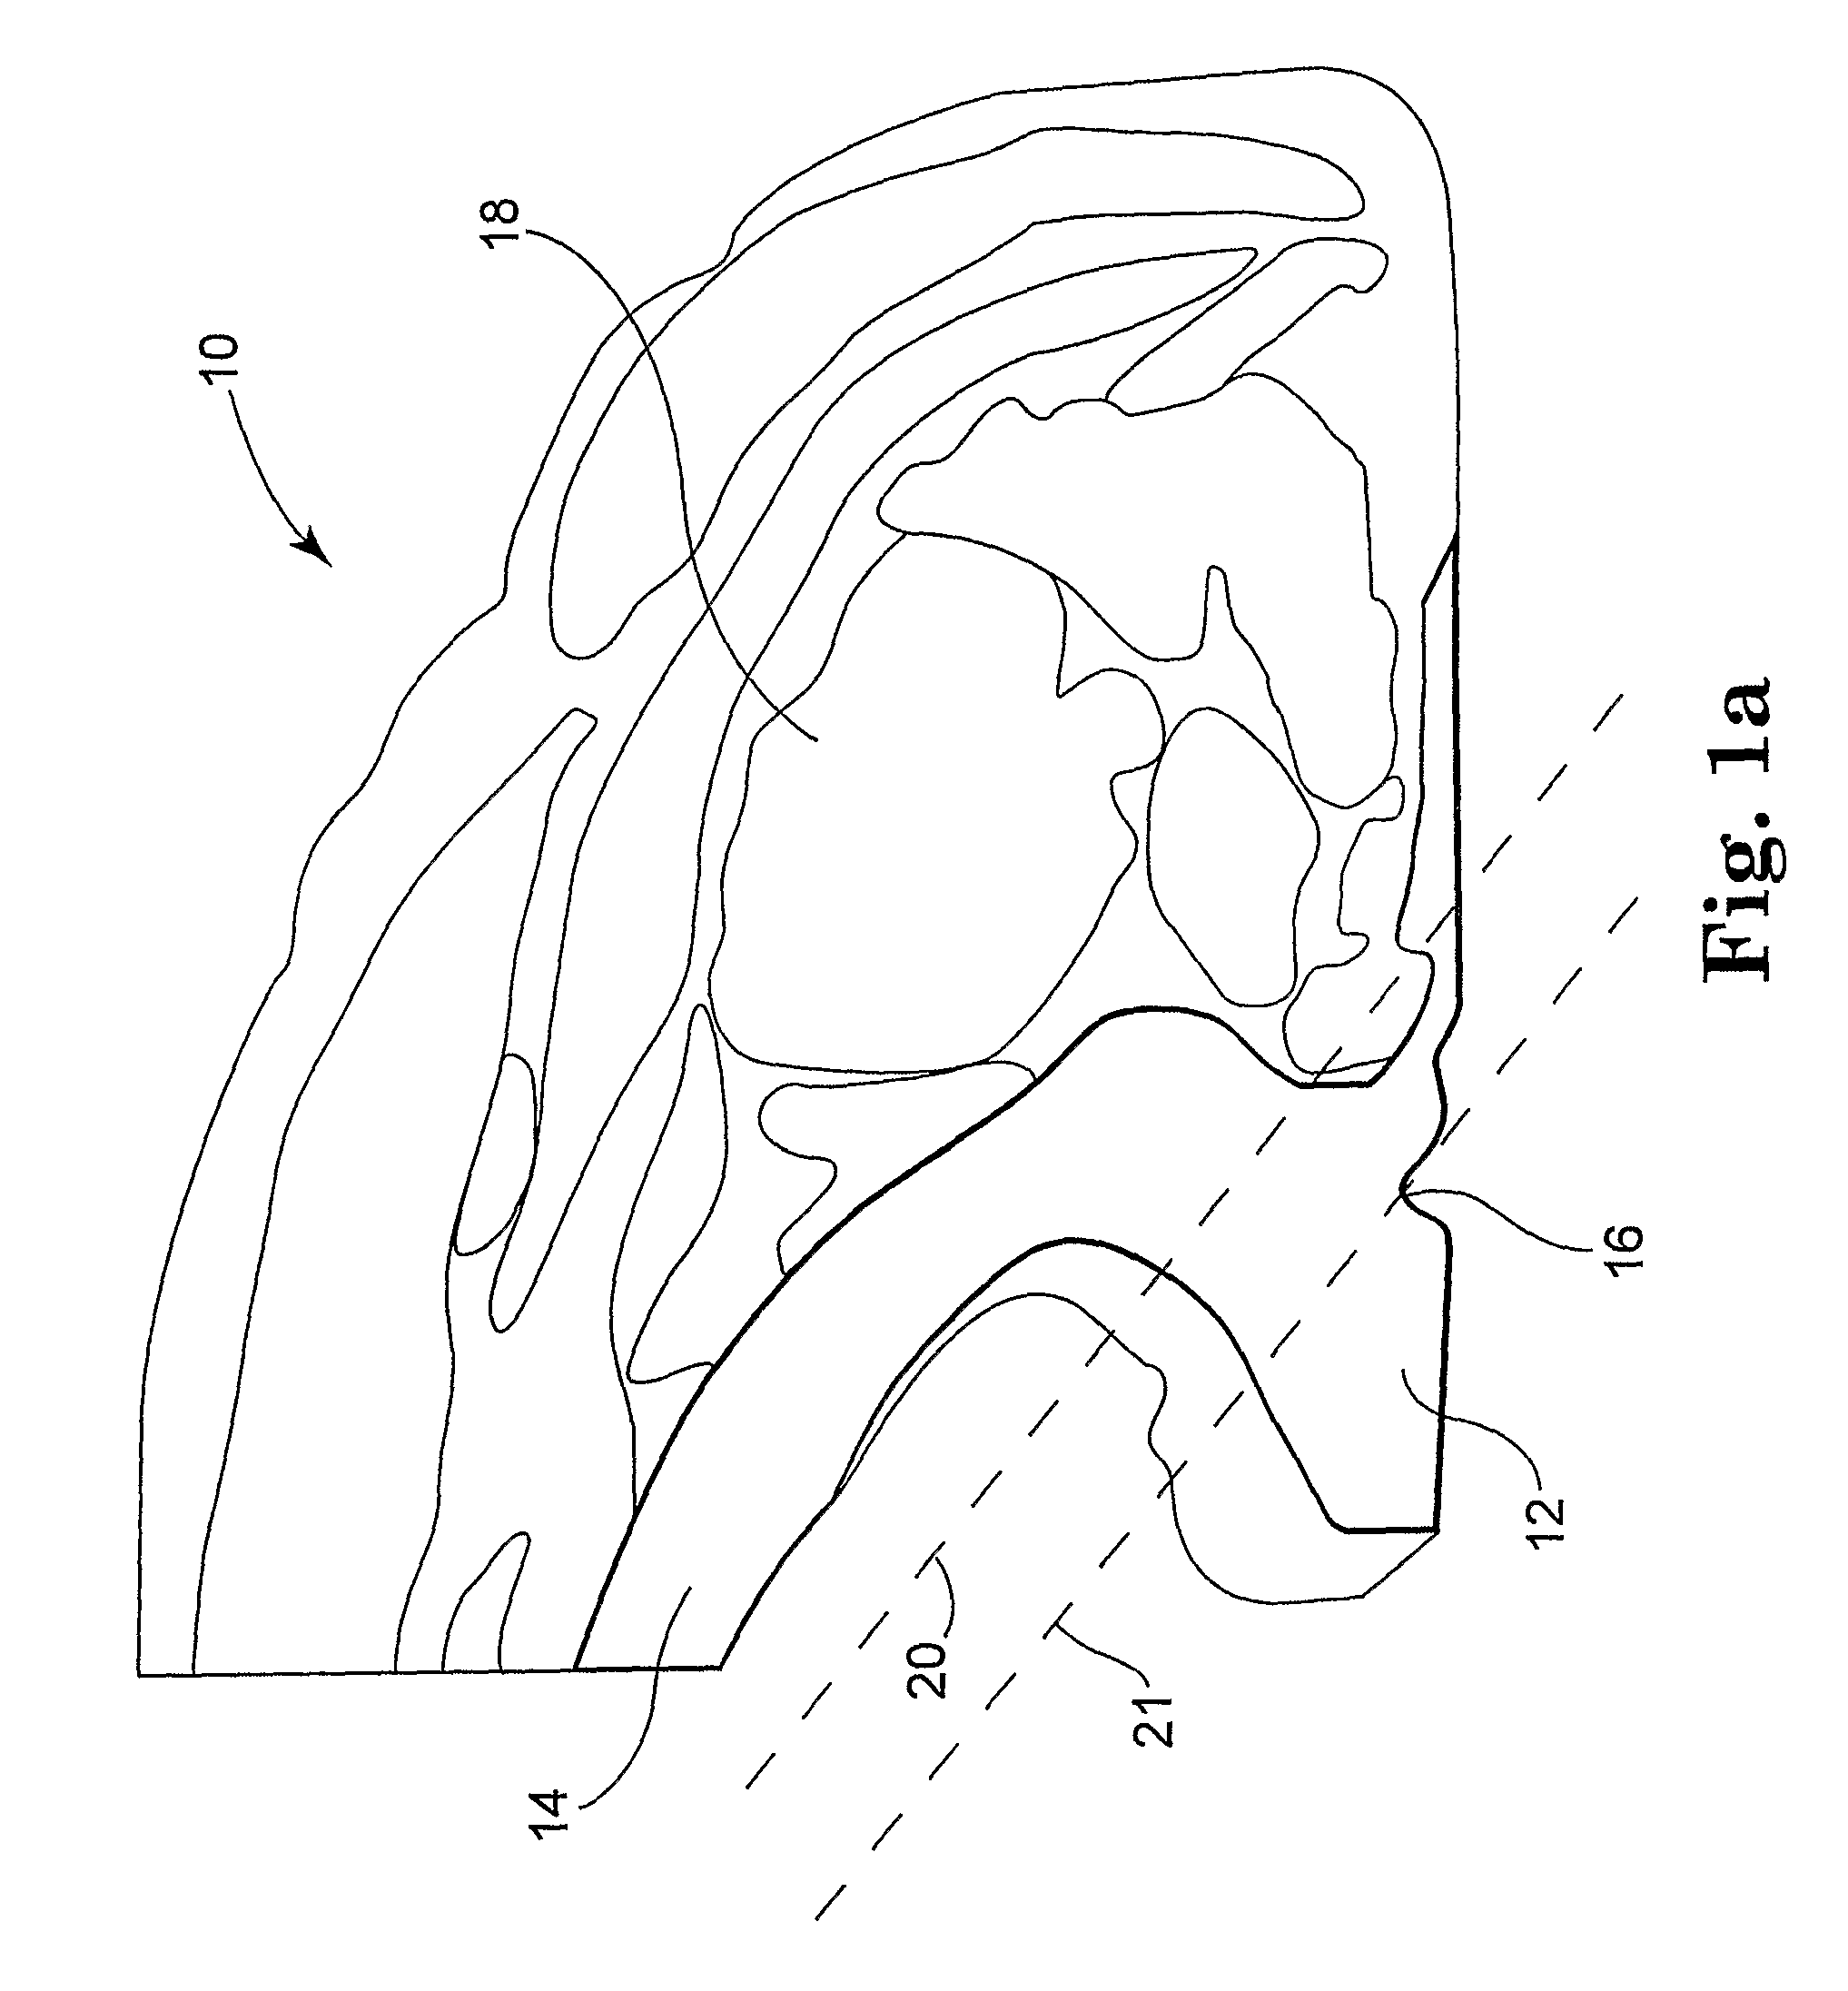 Meat fabrication system and method